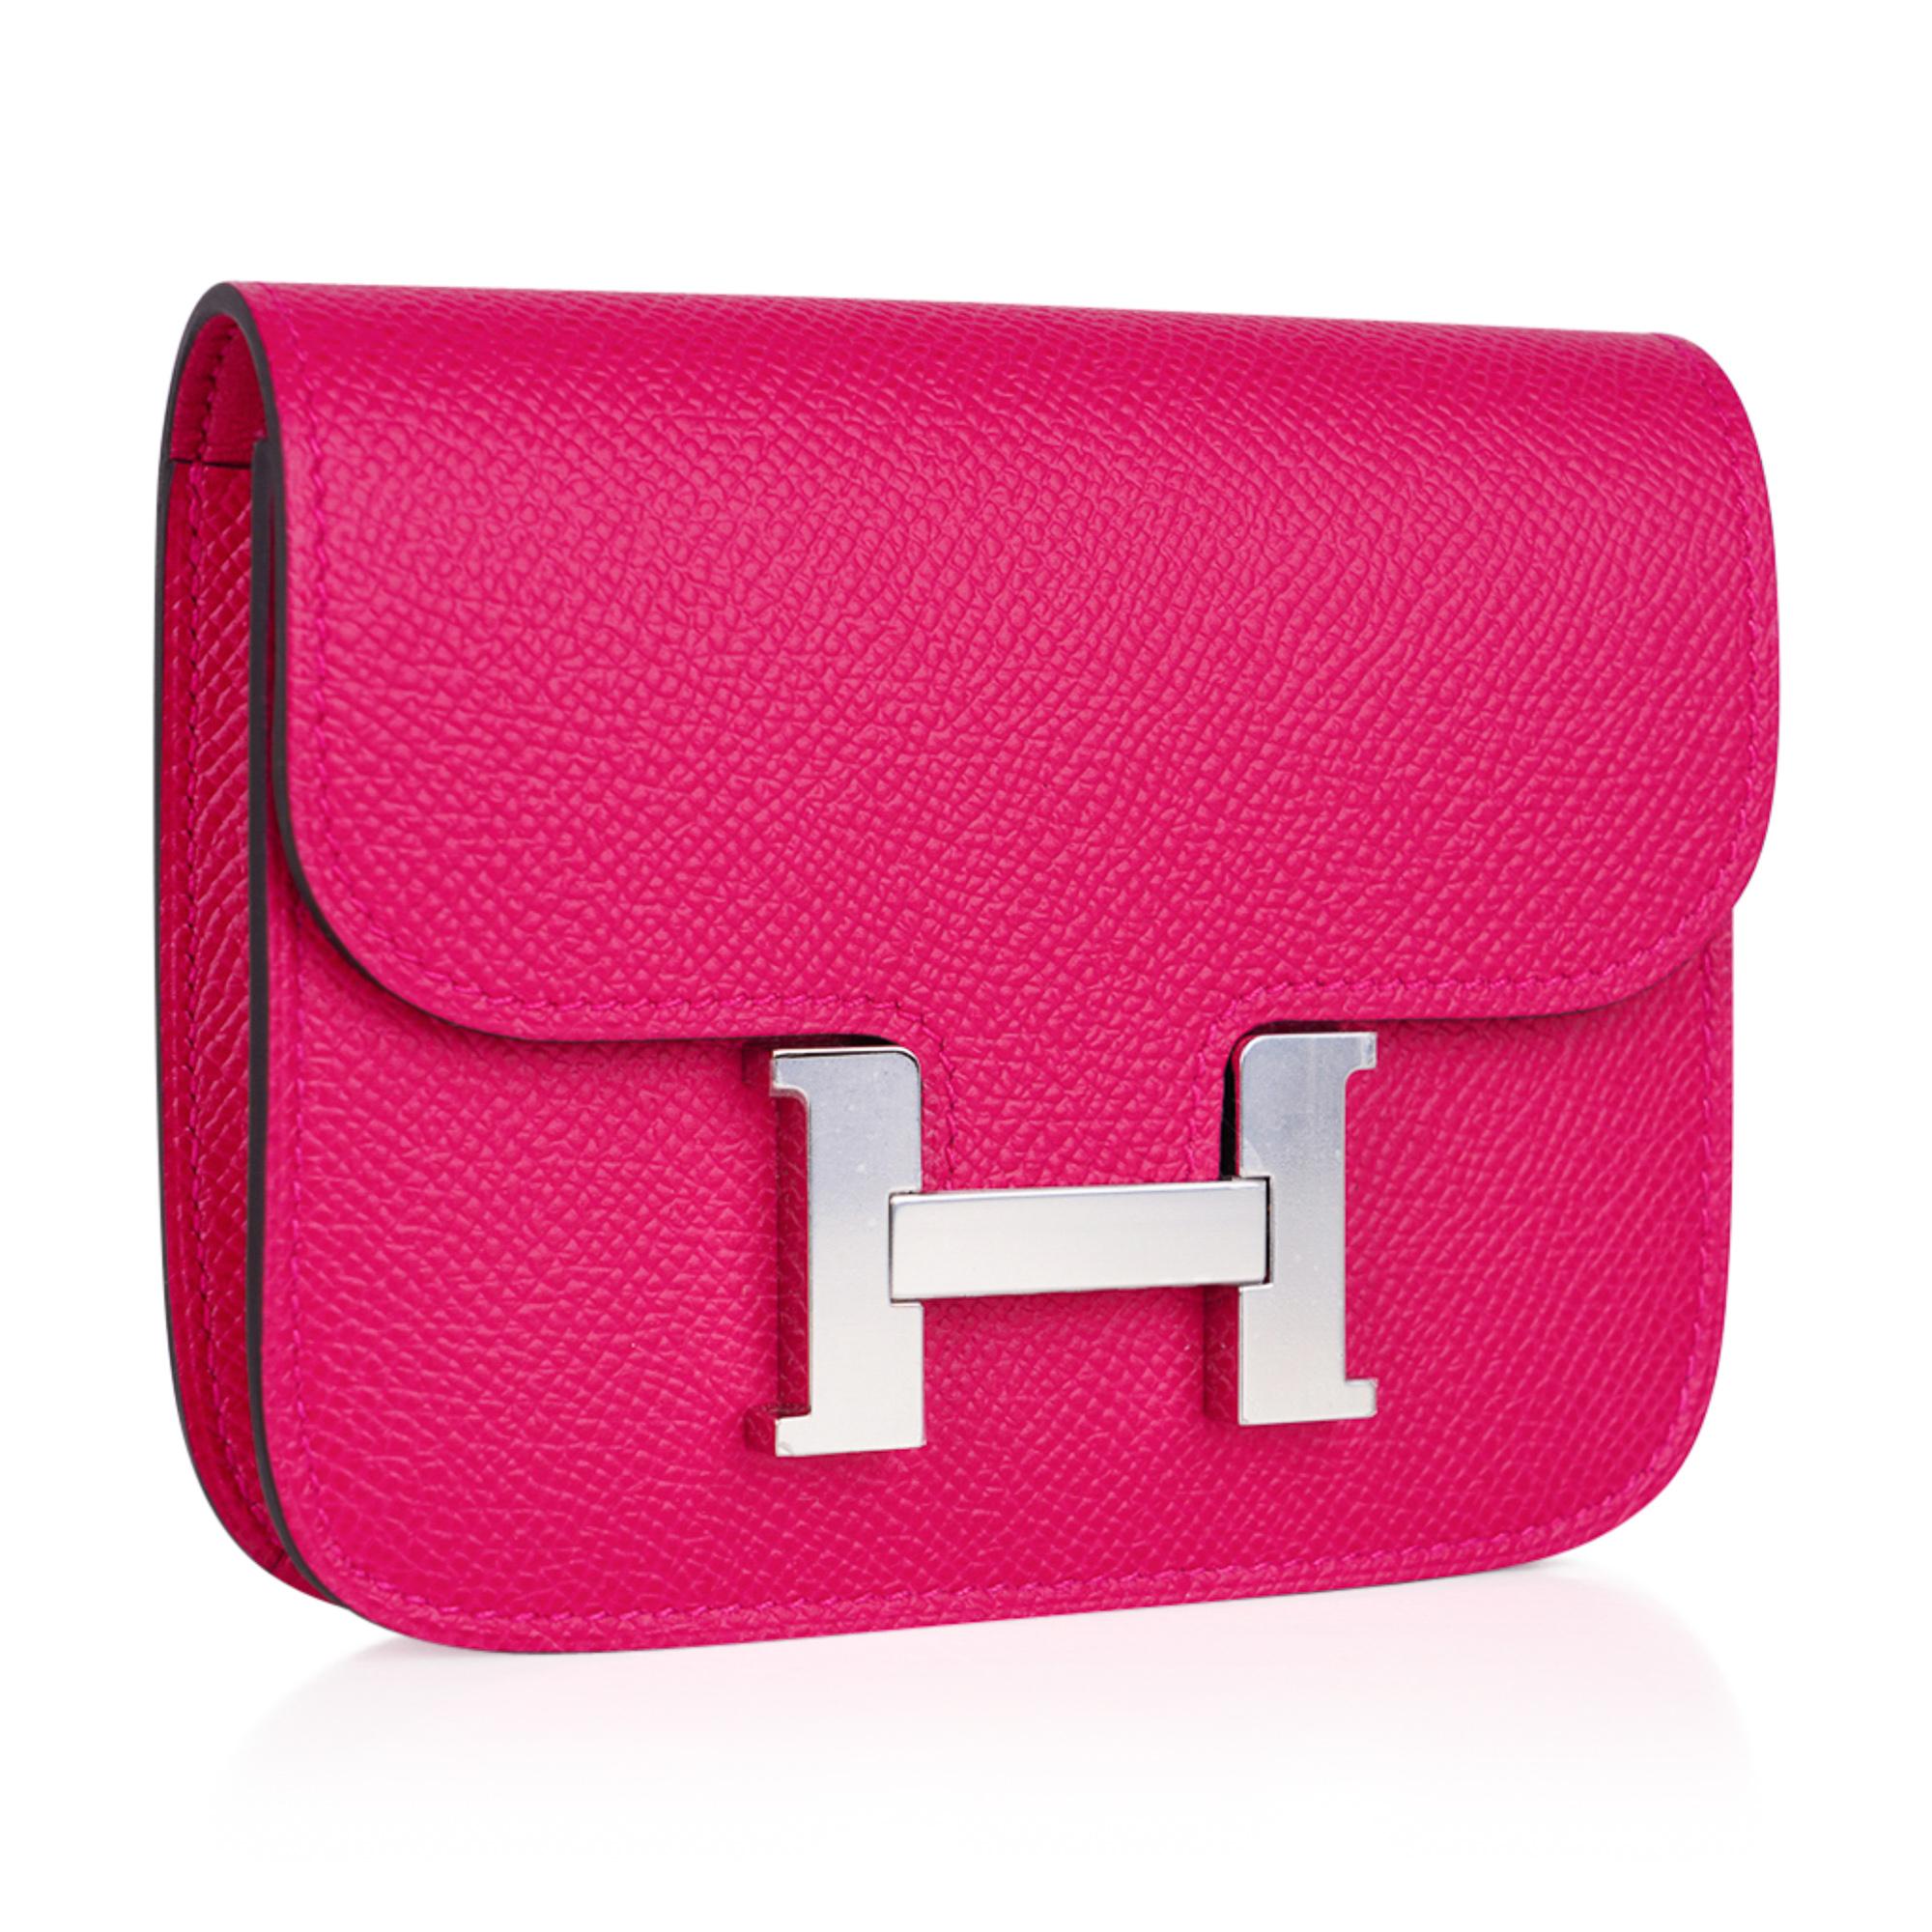 Guaranteed authentic Hermes Constance Slim Wallet Belt bag featured in vibrant Rose Mexico.
Includes removable zipped change purse and 2 credit card slots.
Rear belt loop.
Epsom leather.
Fresh with Palladium hardware.
Comes with sleeper and